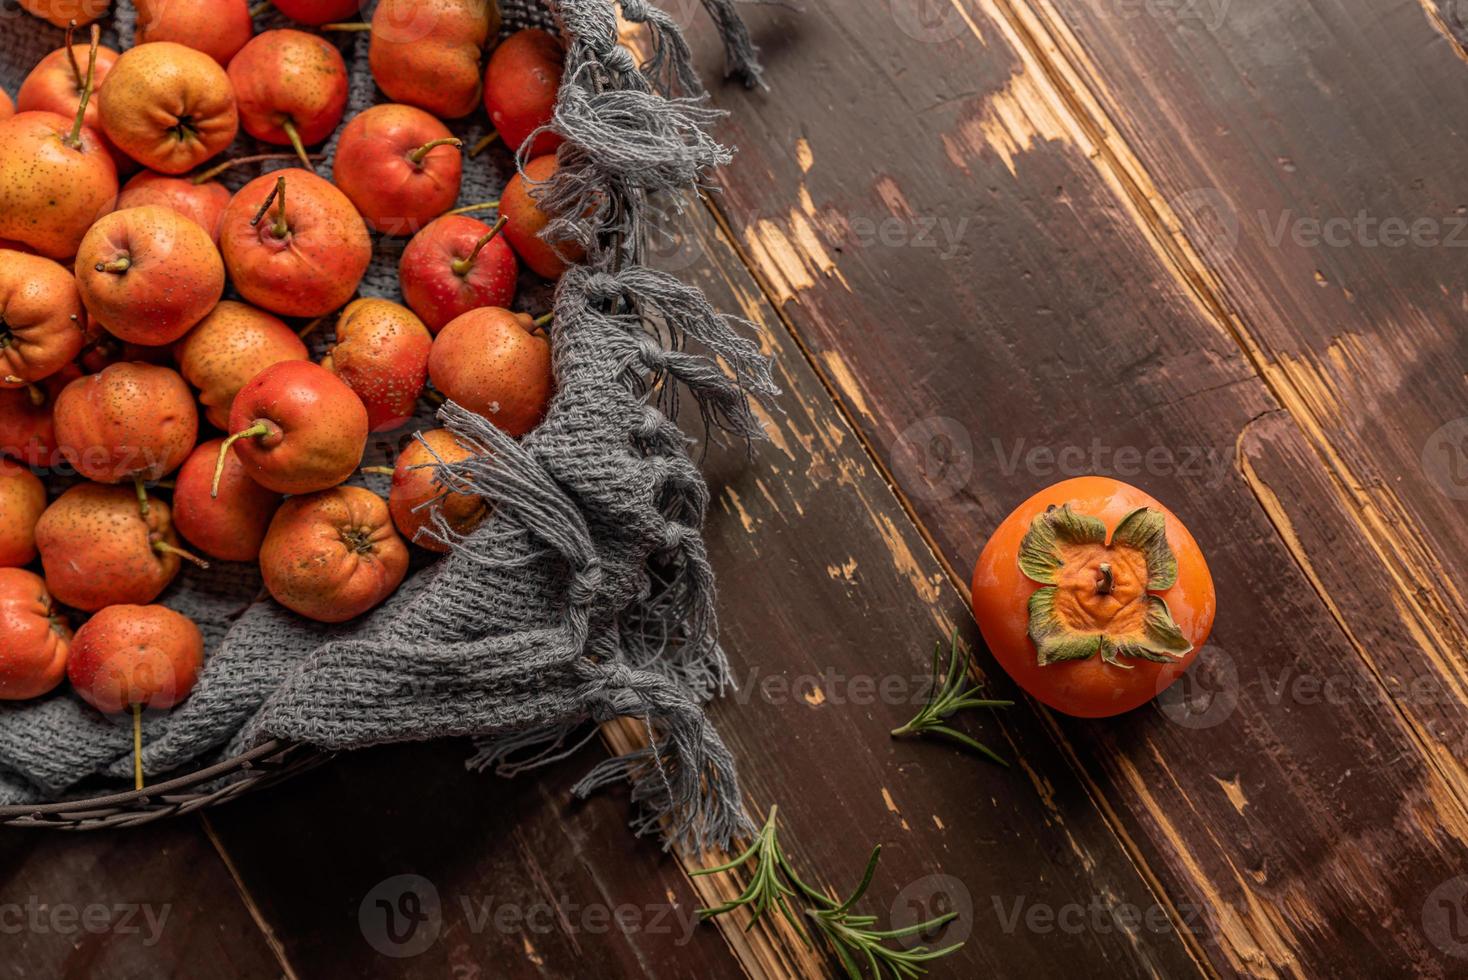 Persimmon and hawthorn are on the wooden table photo